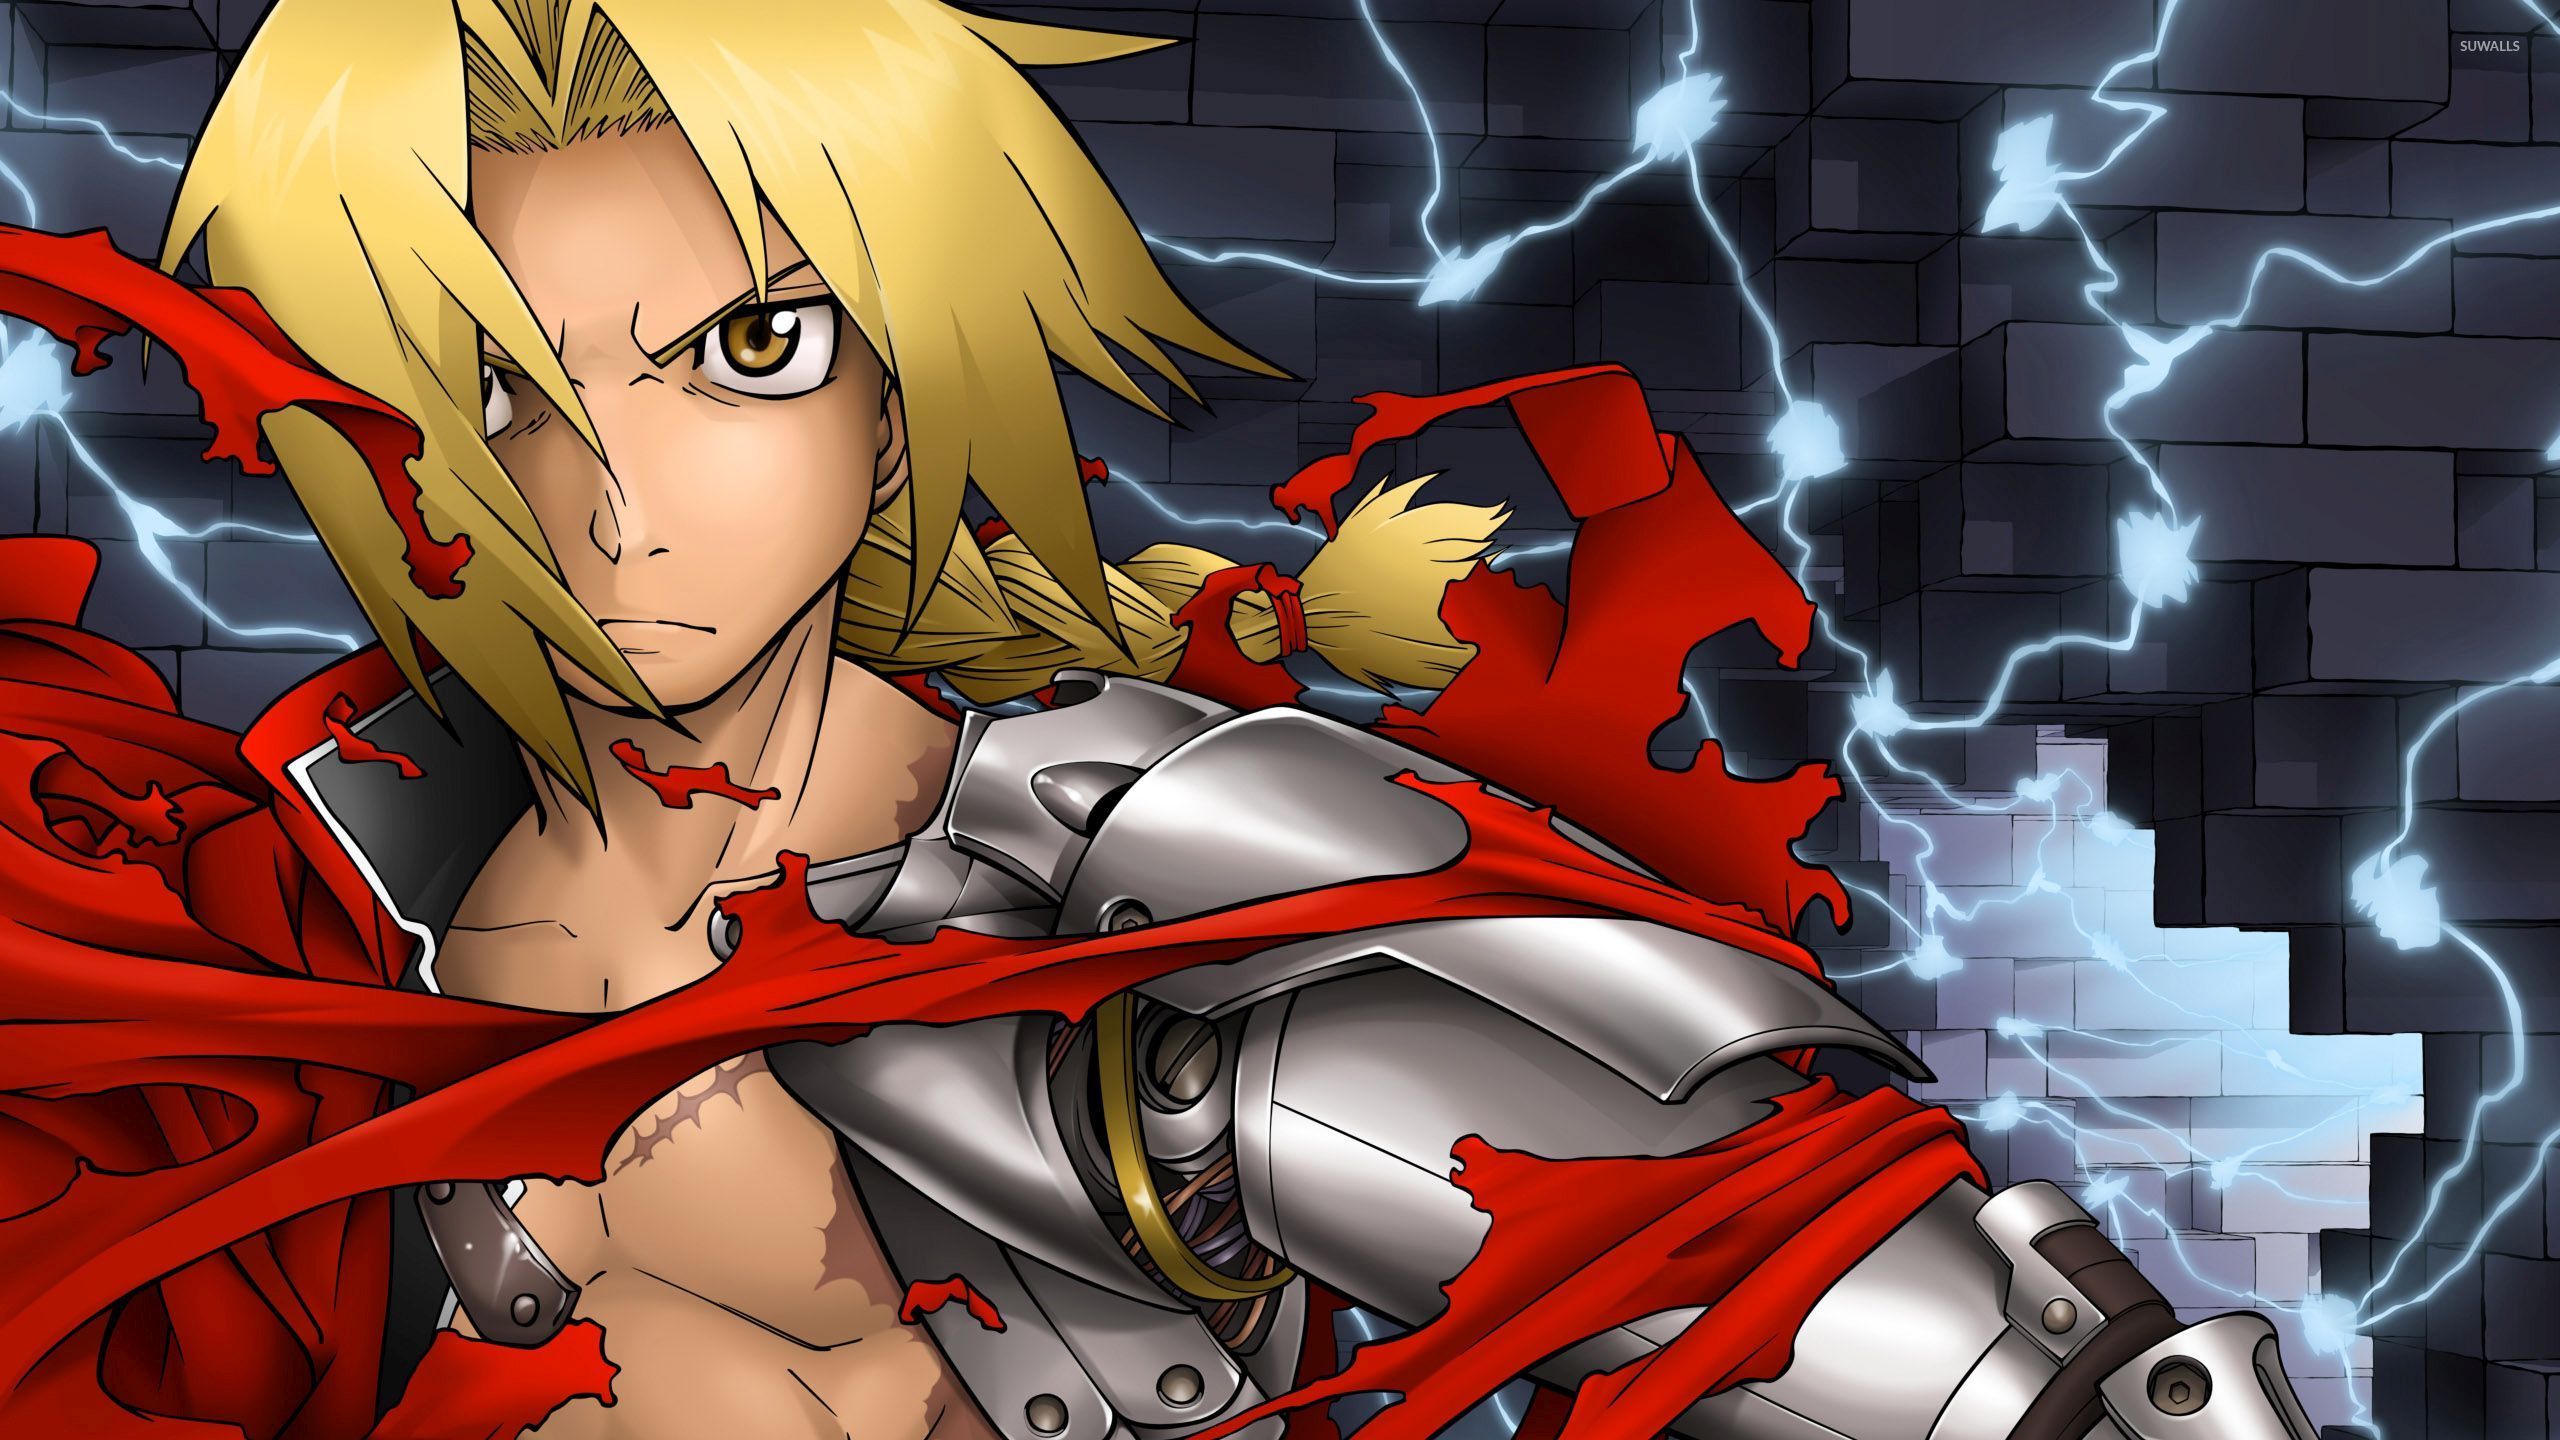 Featured image of post Edward Elric Wallpaper 1920X1080 Cartoon anime manga series edward elric fullmetal alchemist wallpapers and more can be download for mobile desktop best hd wallpaper download best hd desktop wallpapers widescreen wallpapers for free in high quality resolutions 1920x1080 hd